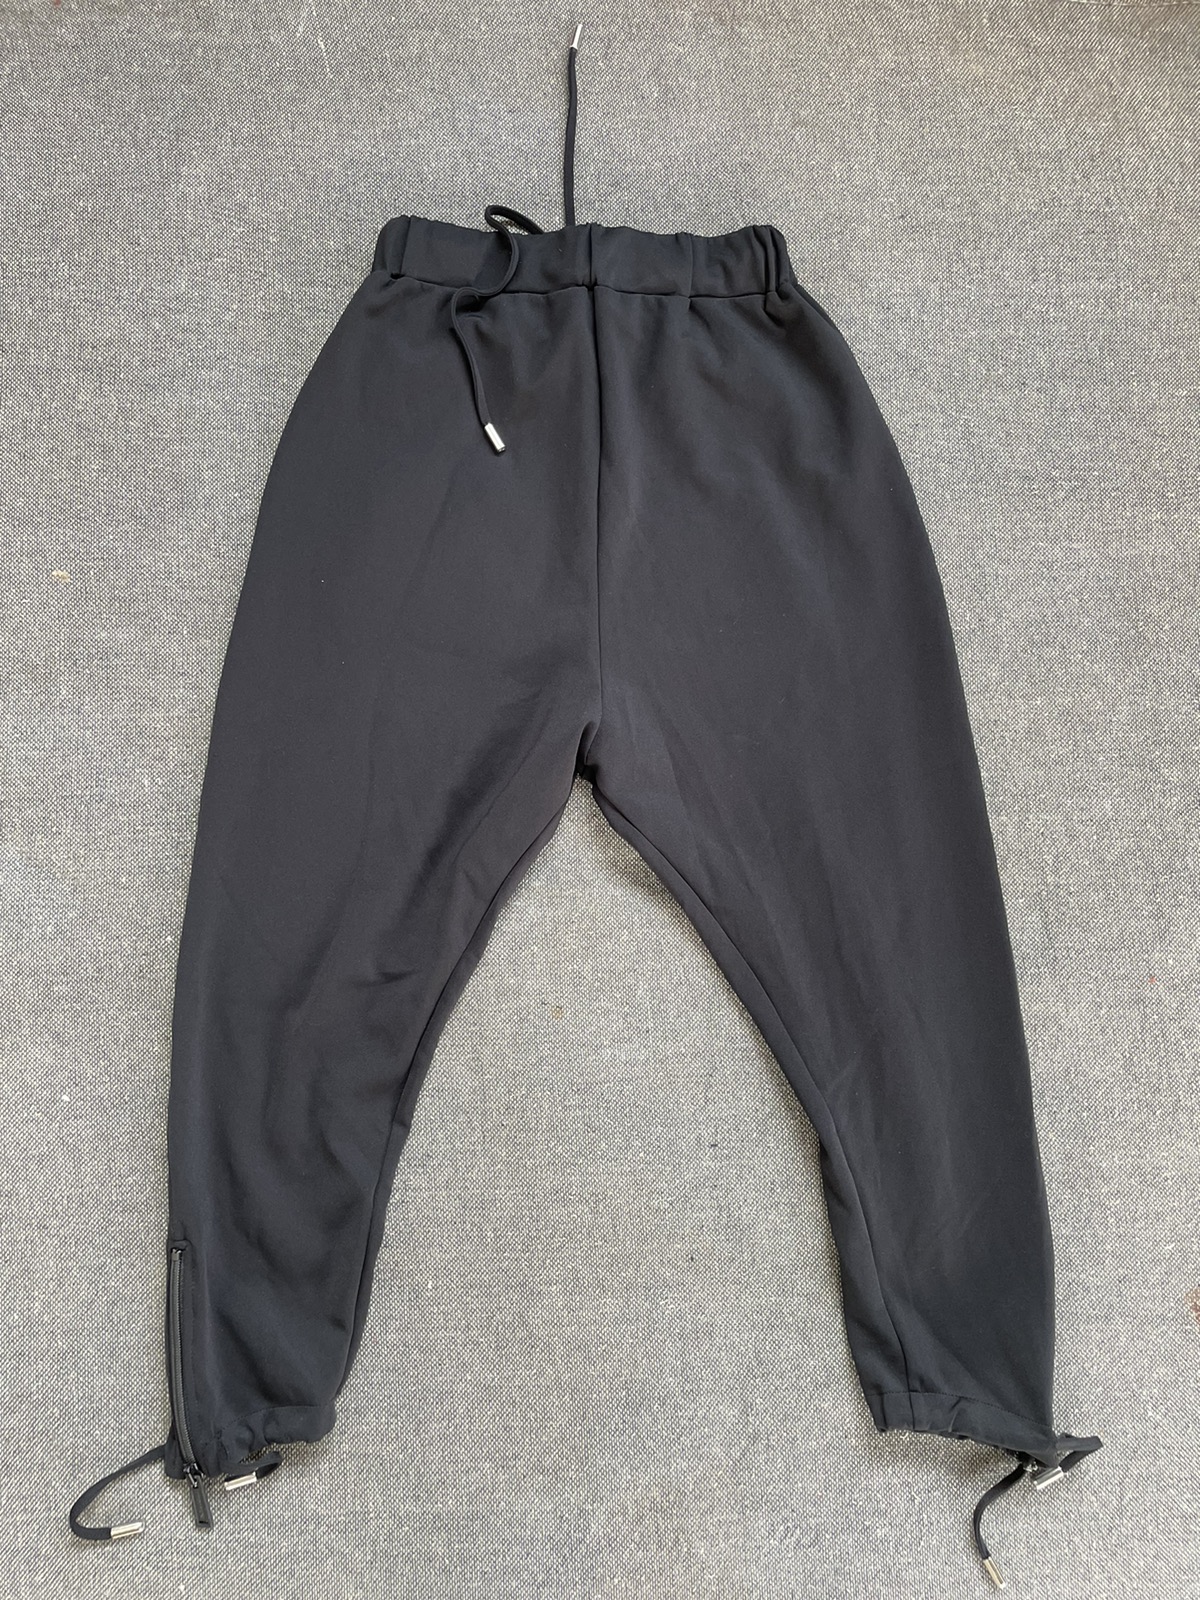 DSQUARED2 Sweatpants Like New Condition Made In Italy - 5